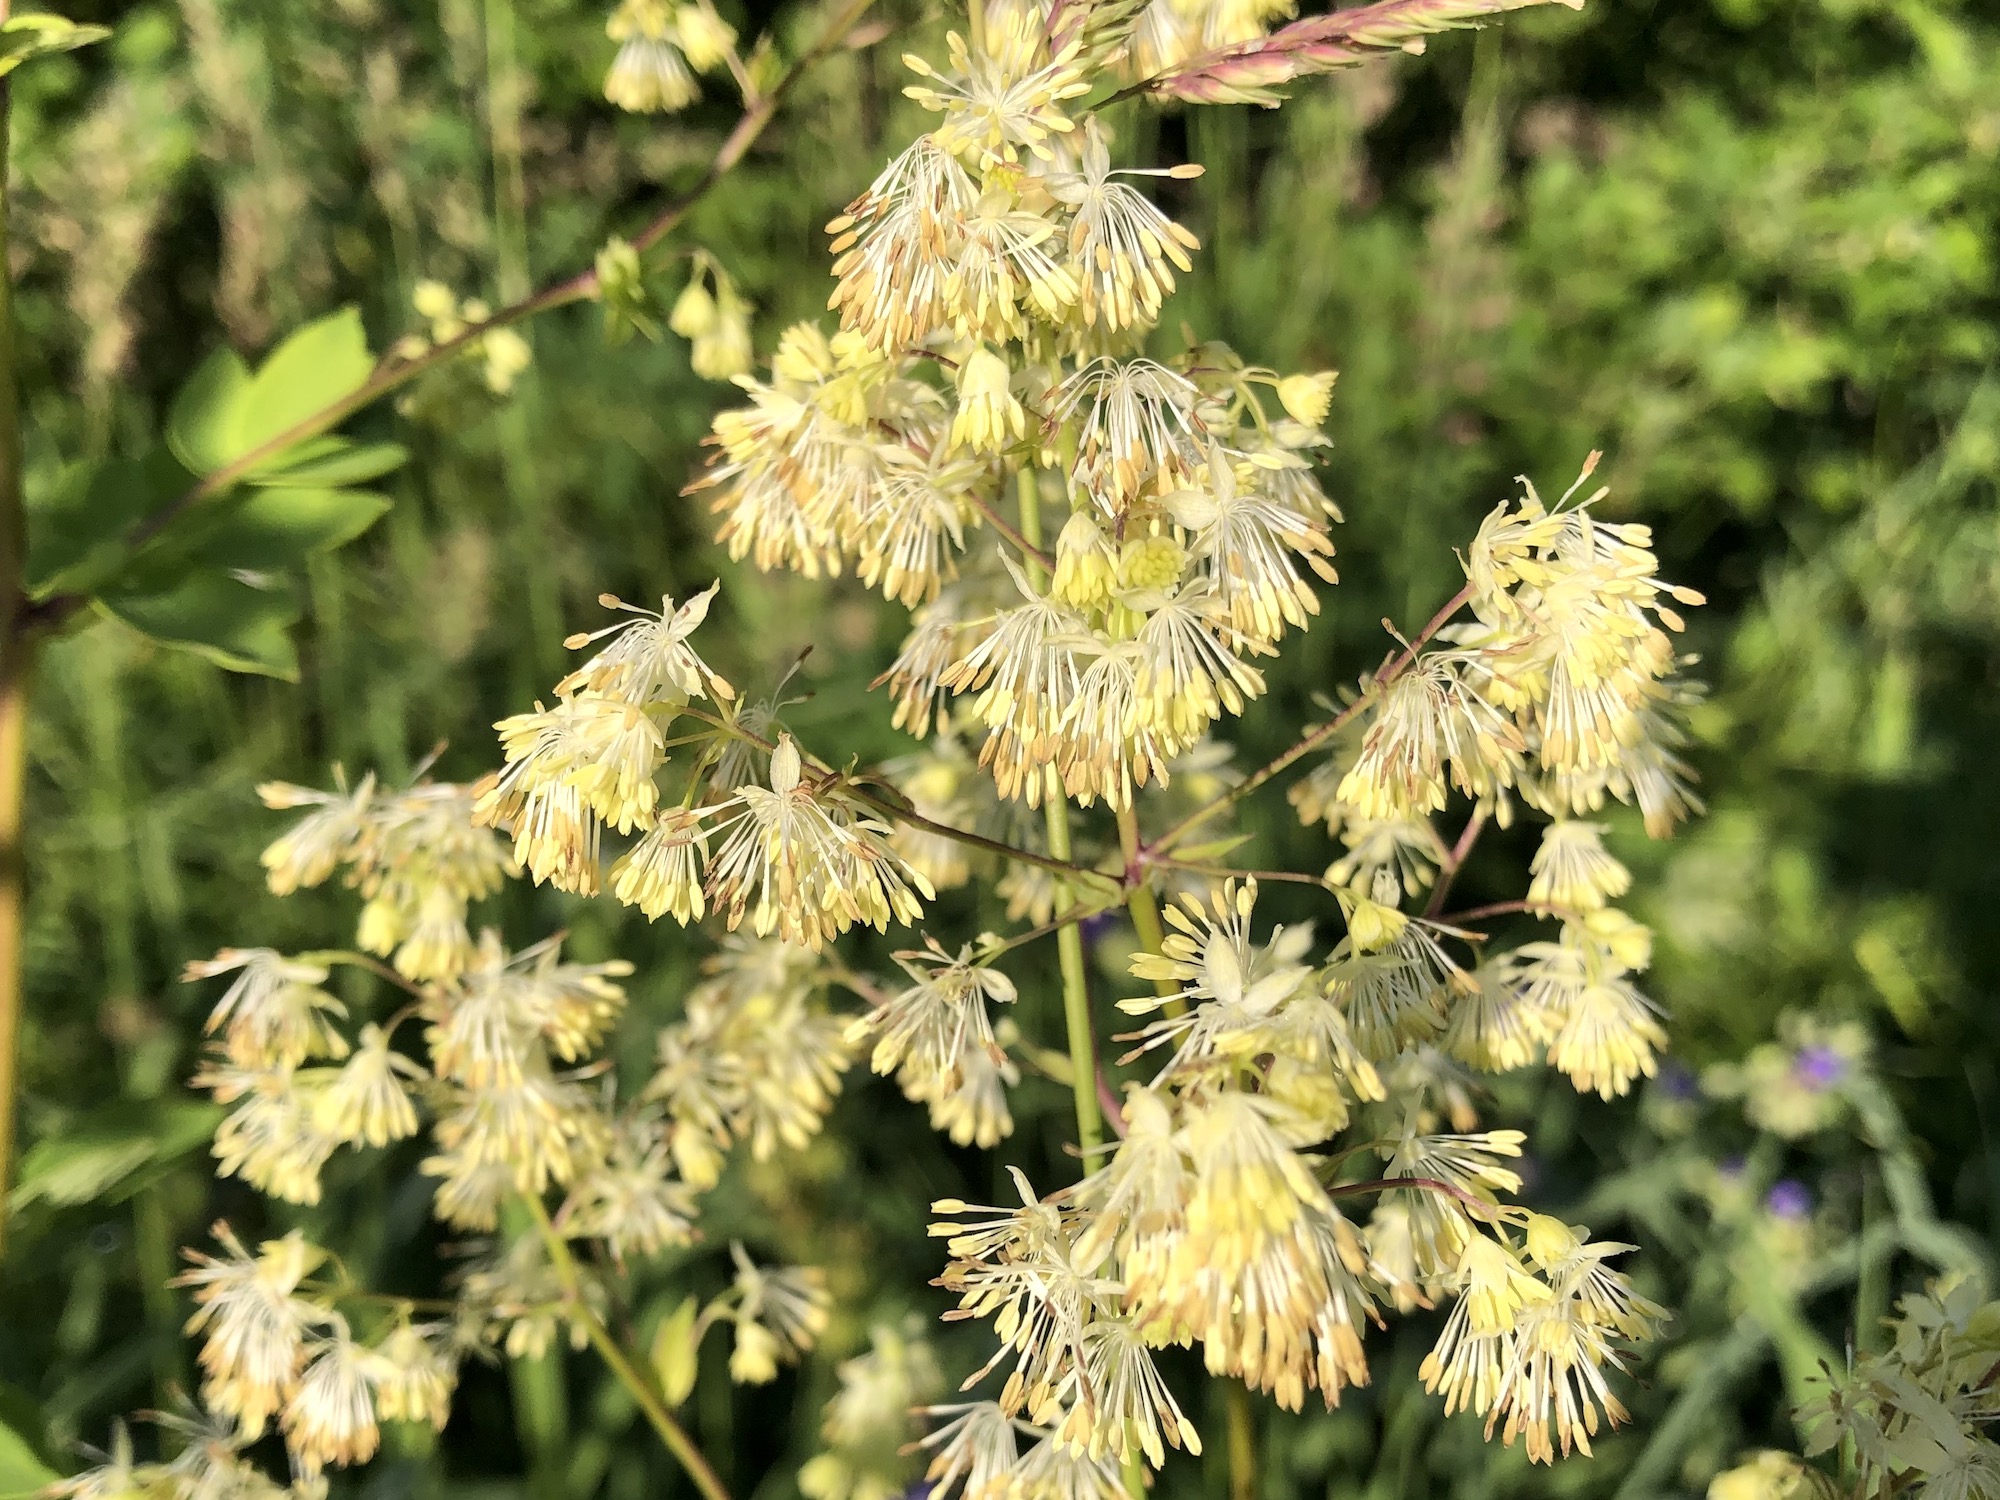 Tall Meadow-rue male flowers on shore of Marion Dunn Pond  on June 16, 2020.